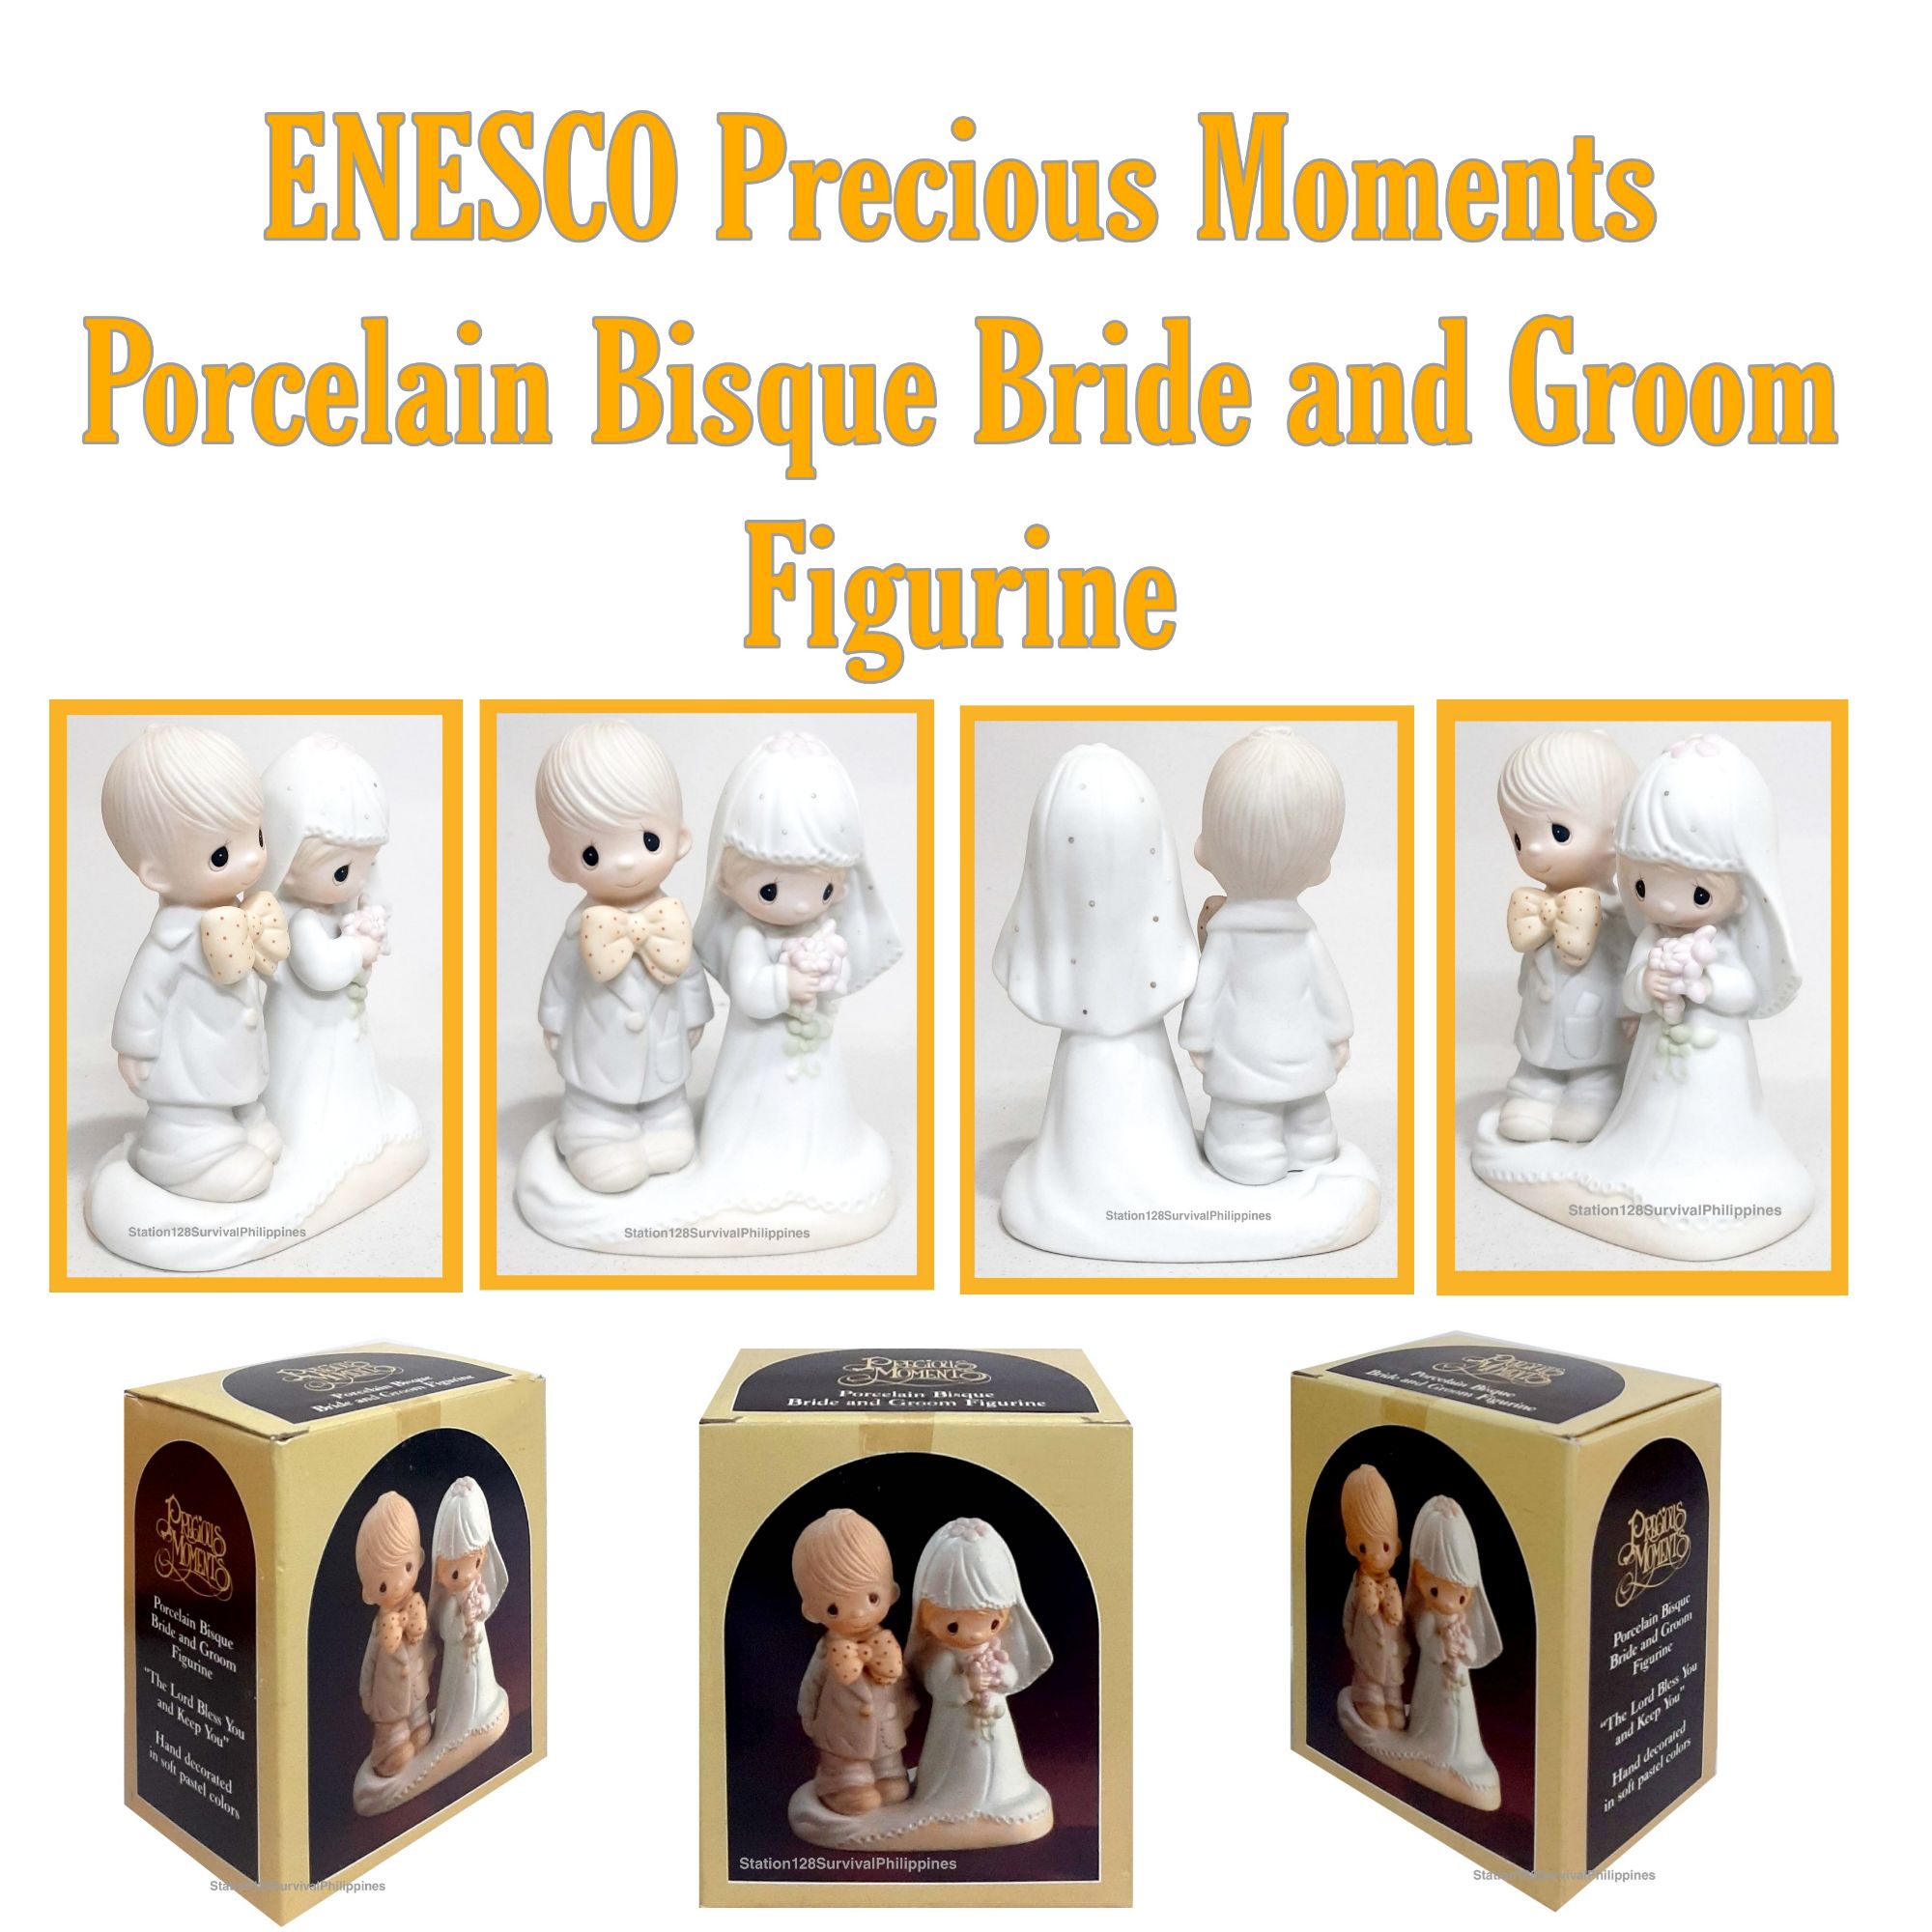 Precious Moments Cake Topper: These Figurines Are Adorable! | EB